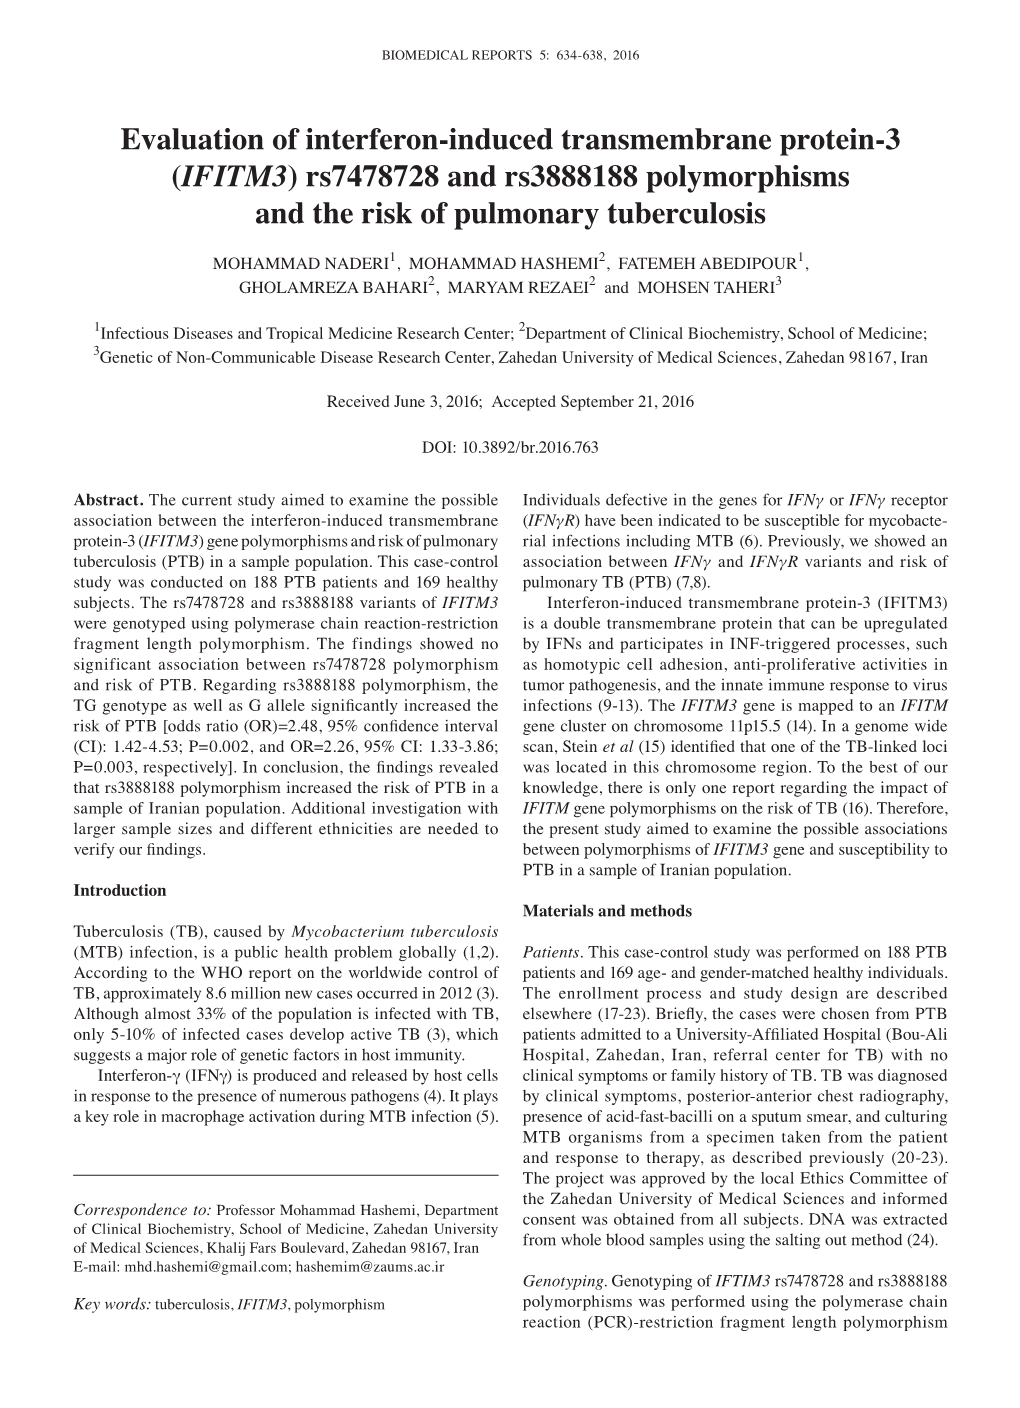 Evaluation of Interferon-Induced Transmembrane Protein-3 (IFITM3) Rs7478728 and Rs3888188 Polymorphisms and the Risk of Pulmonary Tuberculosis